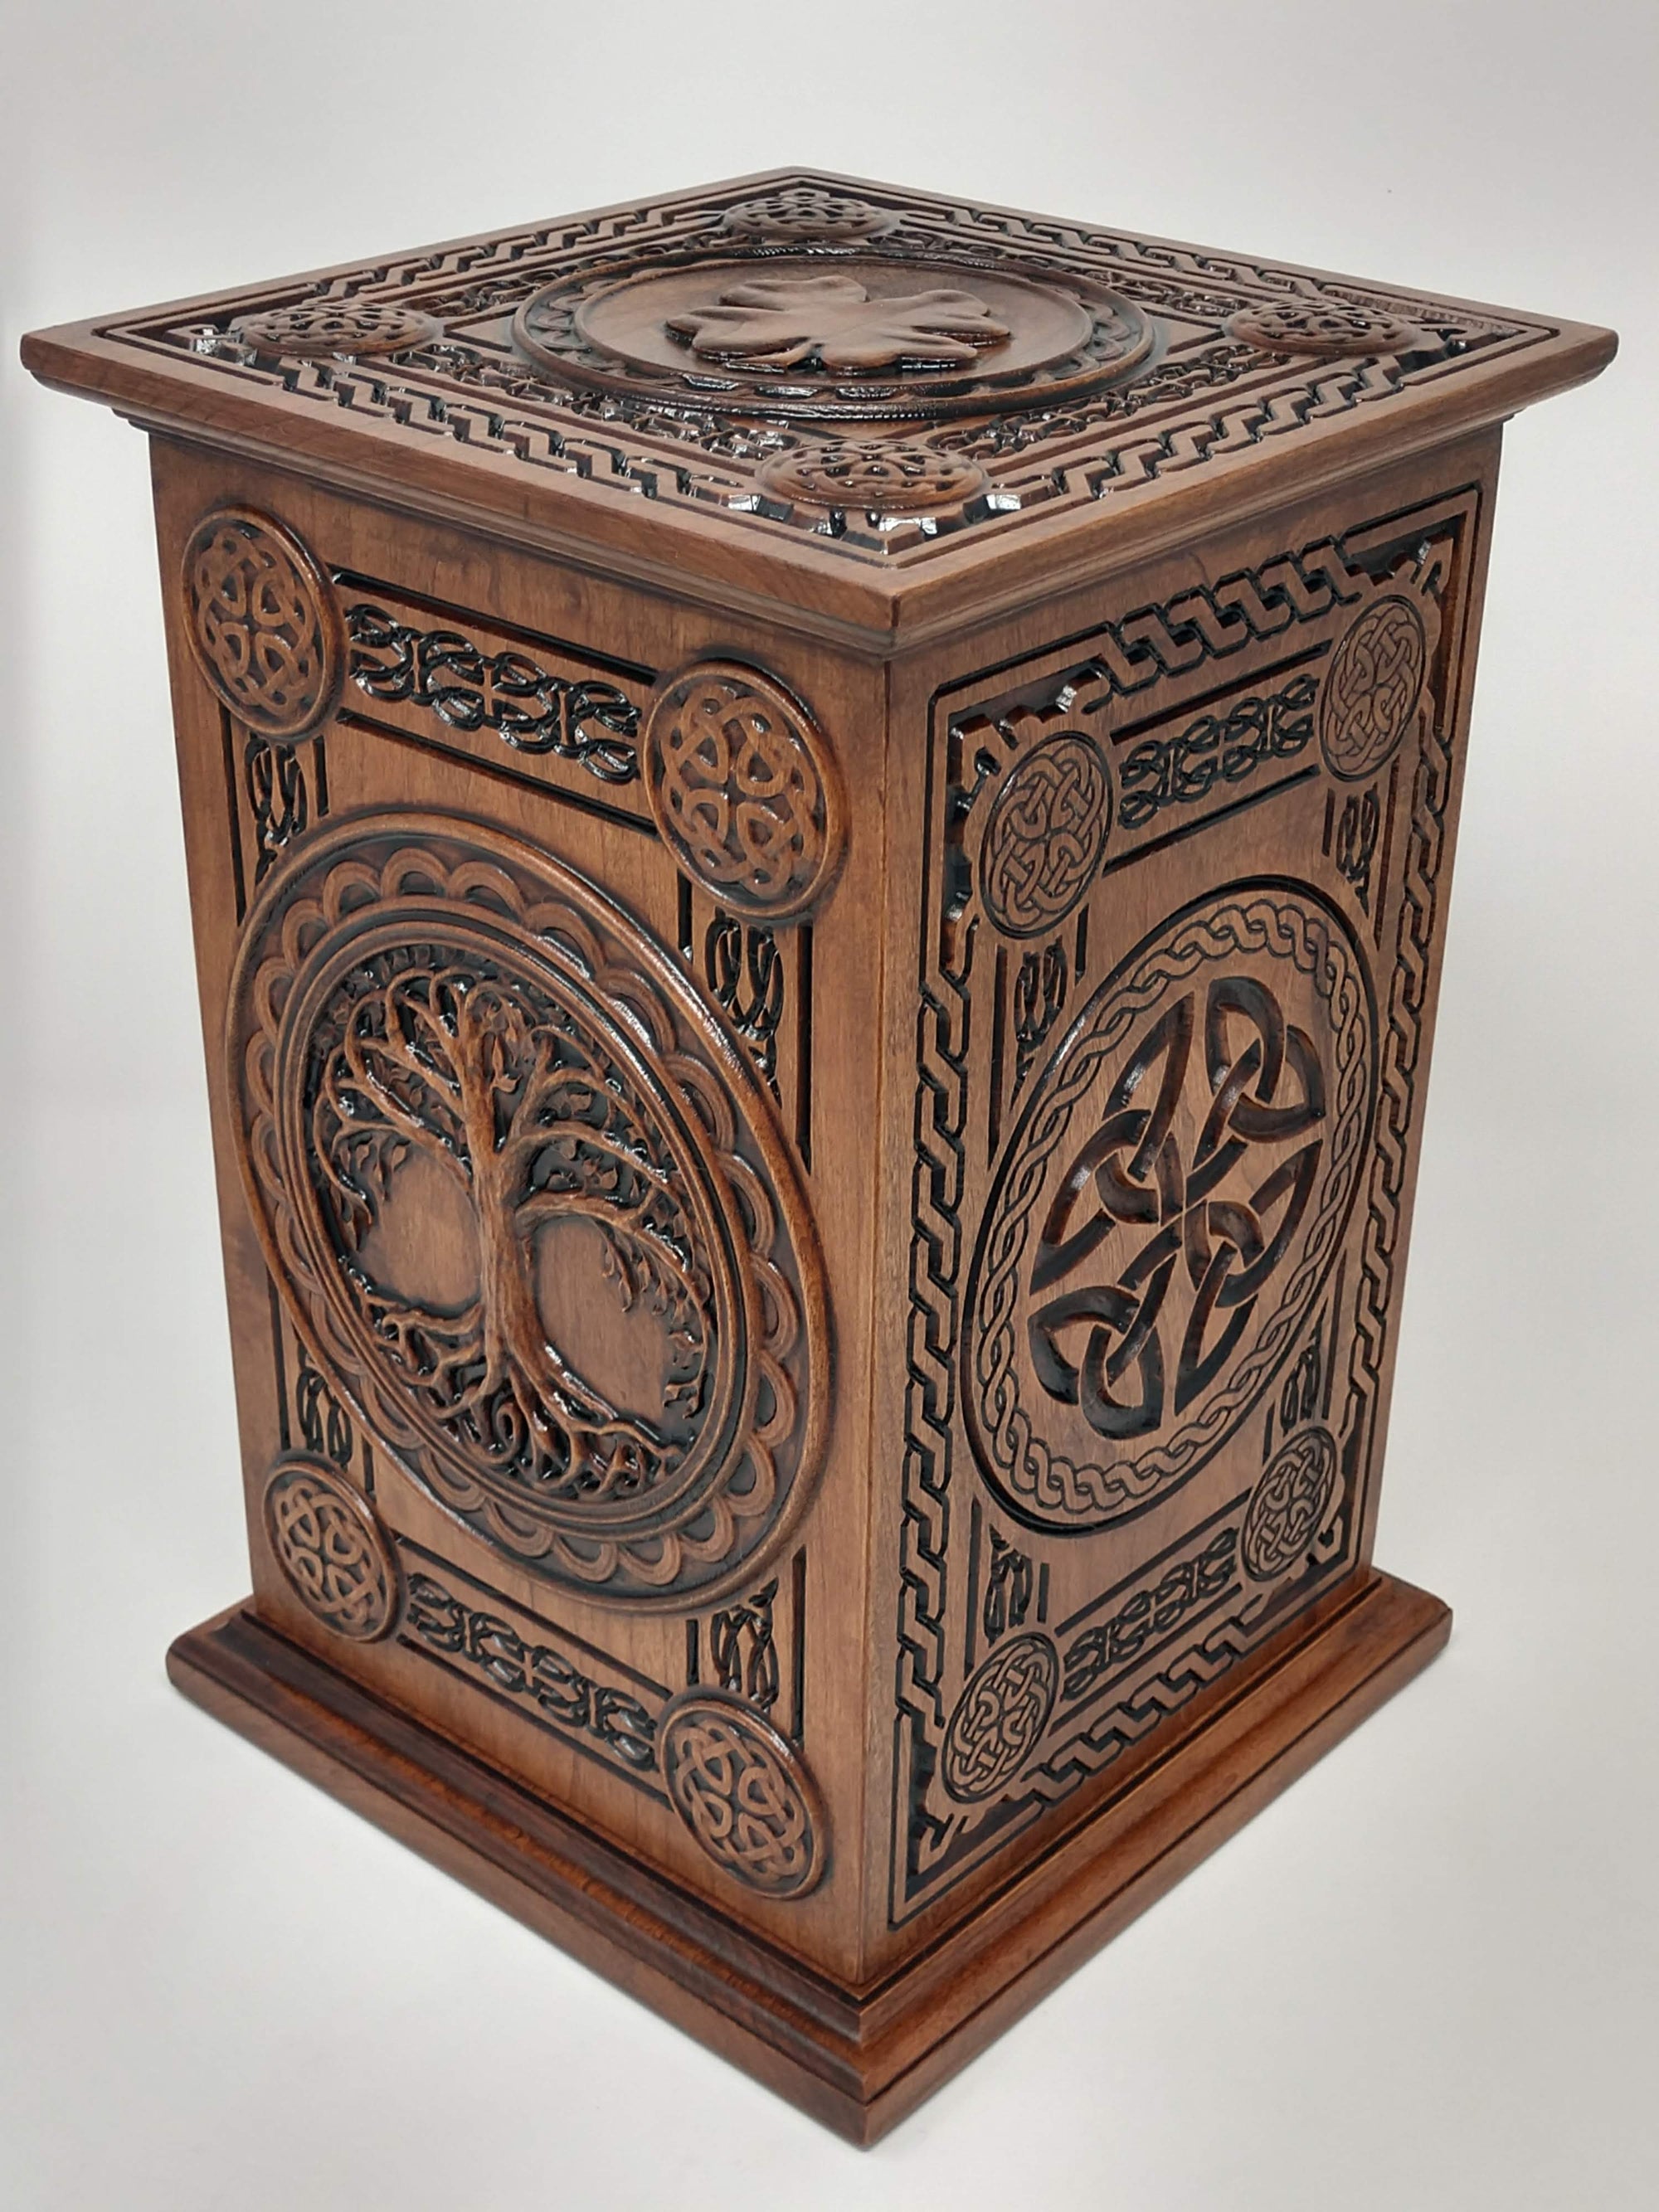 Ash urns for humans view from the right corner showing the right side with the Celtic Trinity knots and other celtic weaves and knot designs and boarders with the shamrock/four leaf clover caring on the top. The front with the Celtic Tree of Life us shown in this image of the ash urns for humans